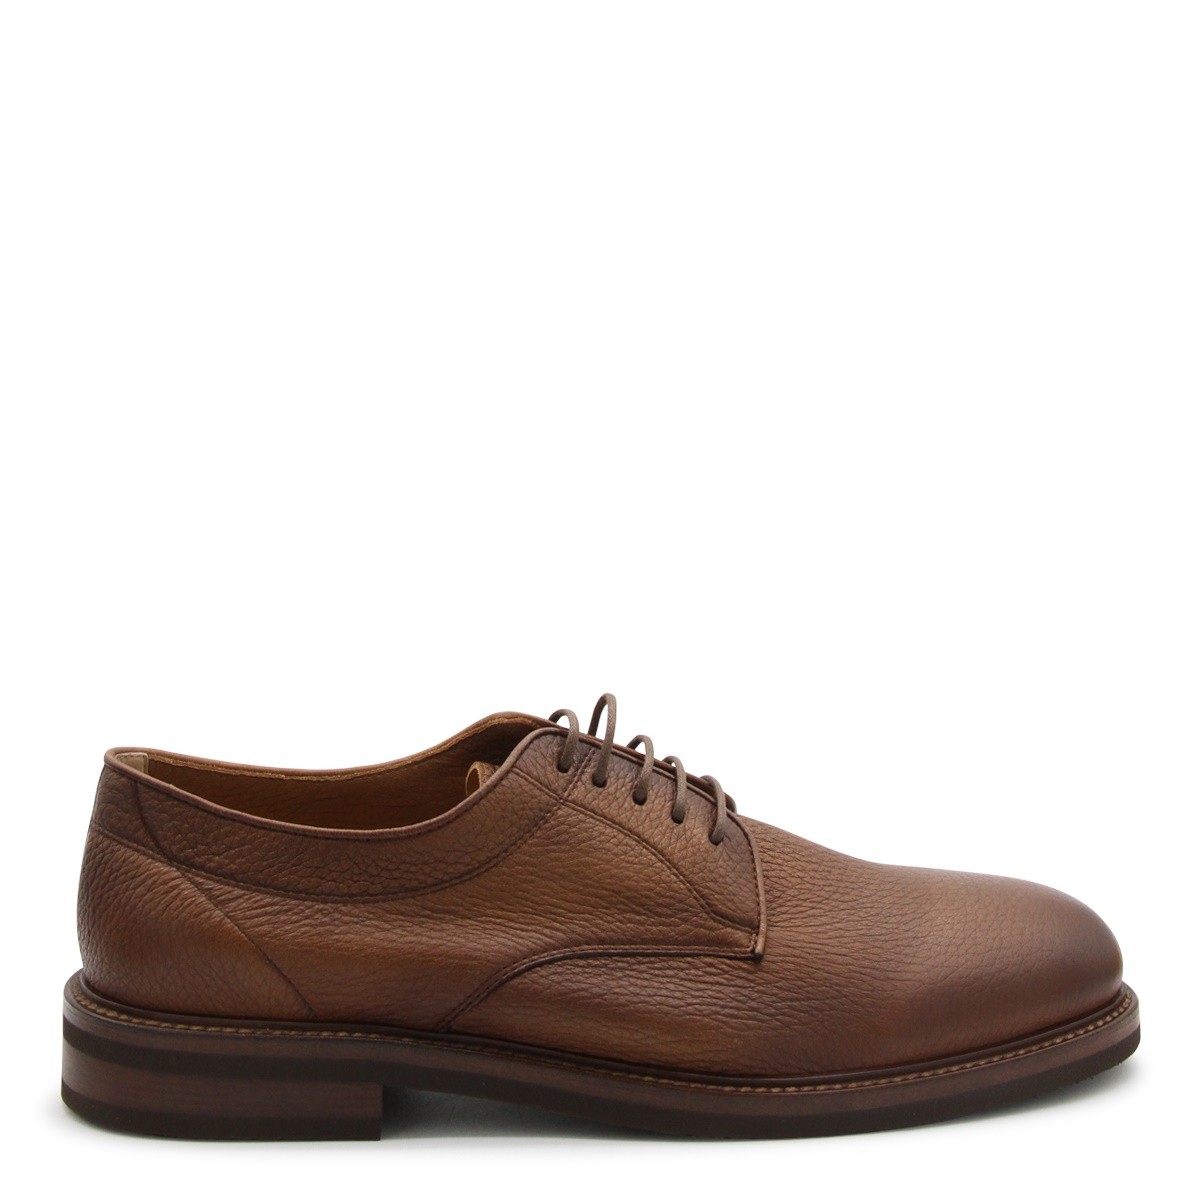 BROWN LEATHER DERBY SHOES